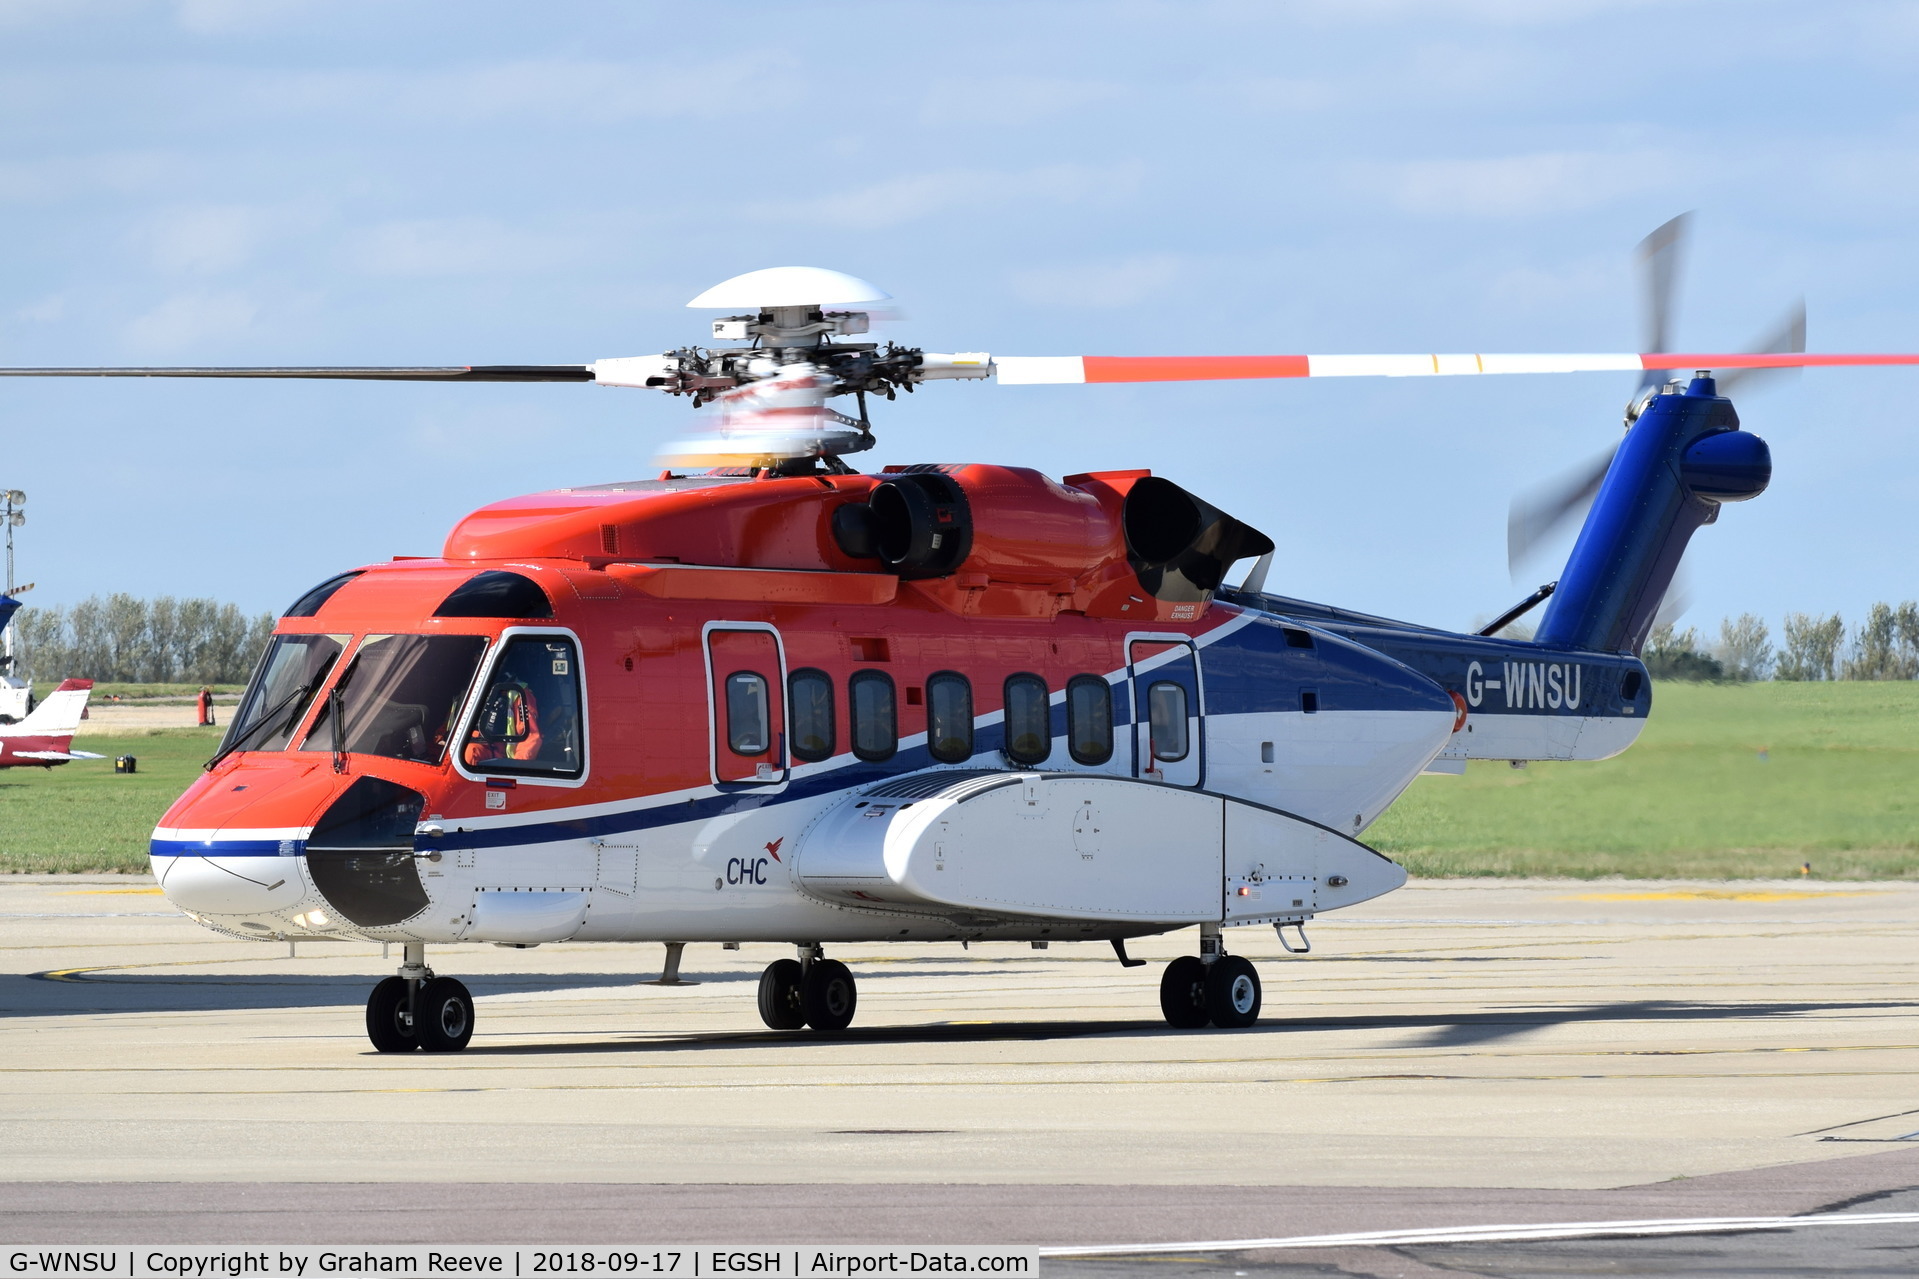 G-WNSU, 2014 Sikorsky S-92A C/N 920229, Just landed at Norwich.